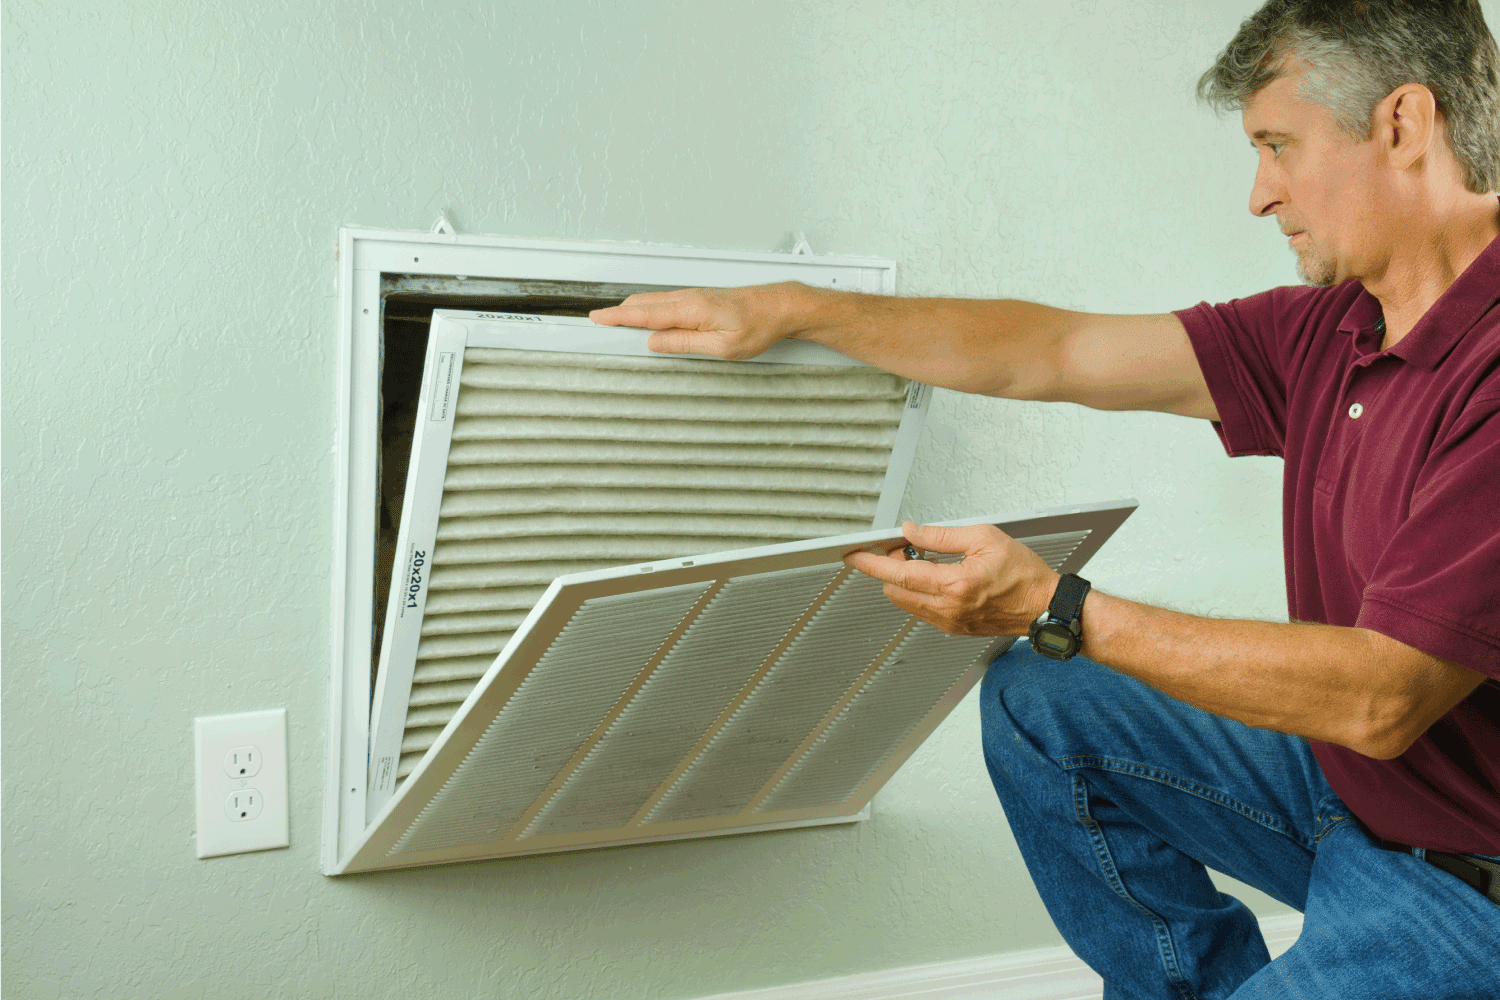 Professional repair service man or diy home owner removing a dirty air filter